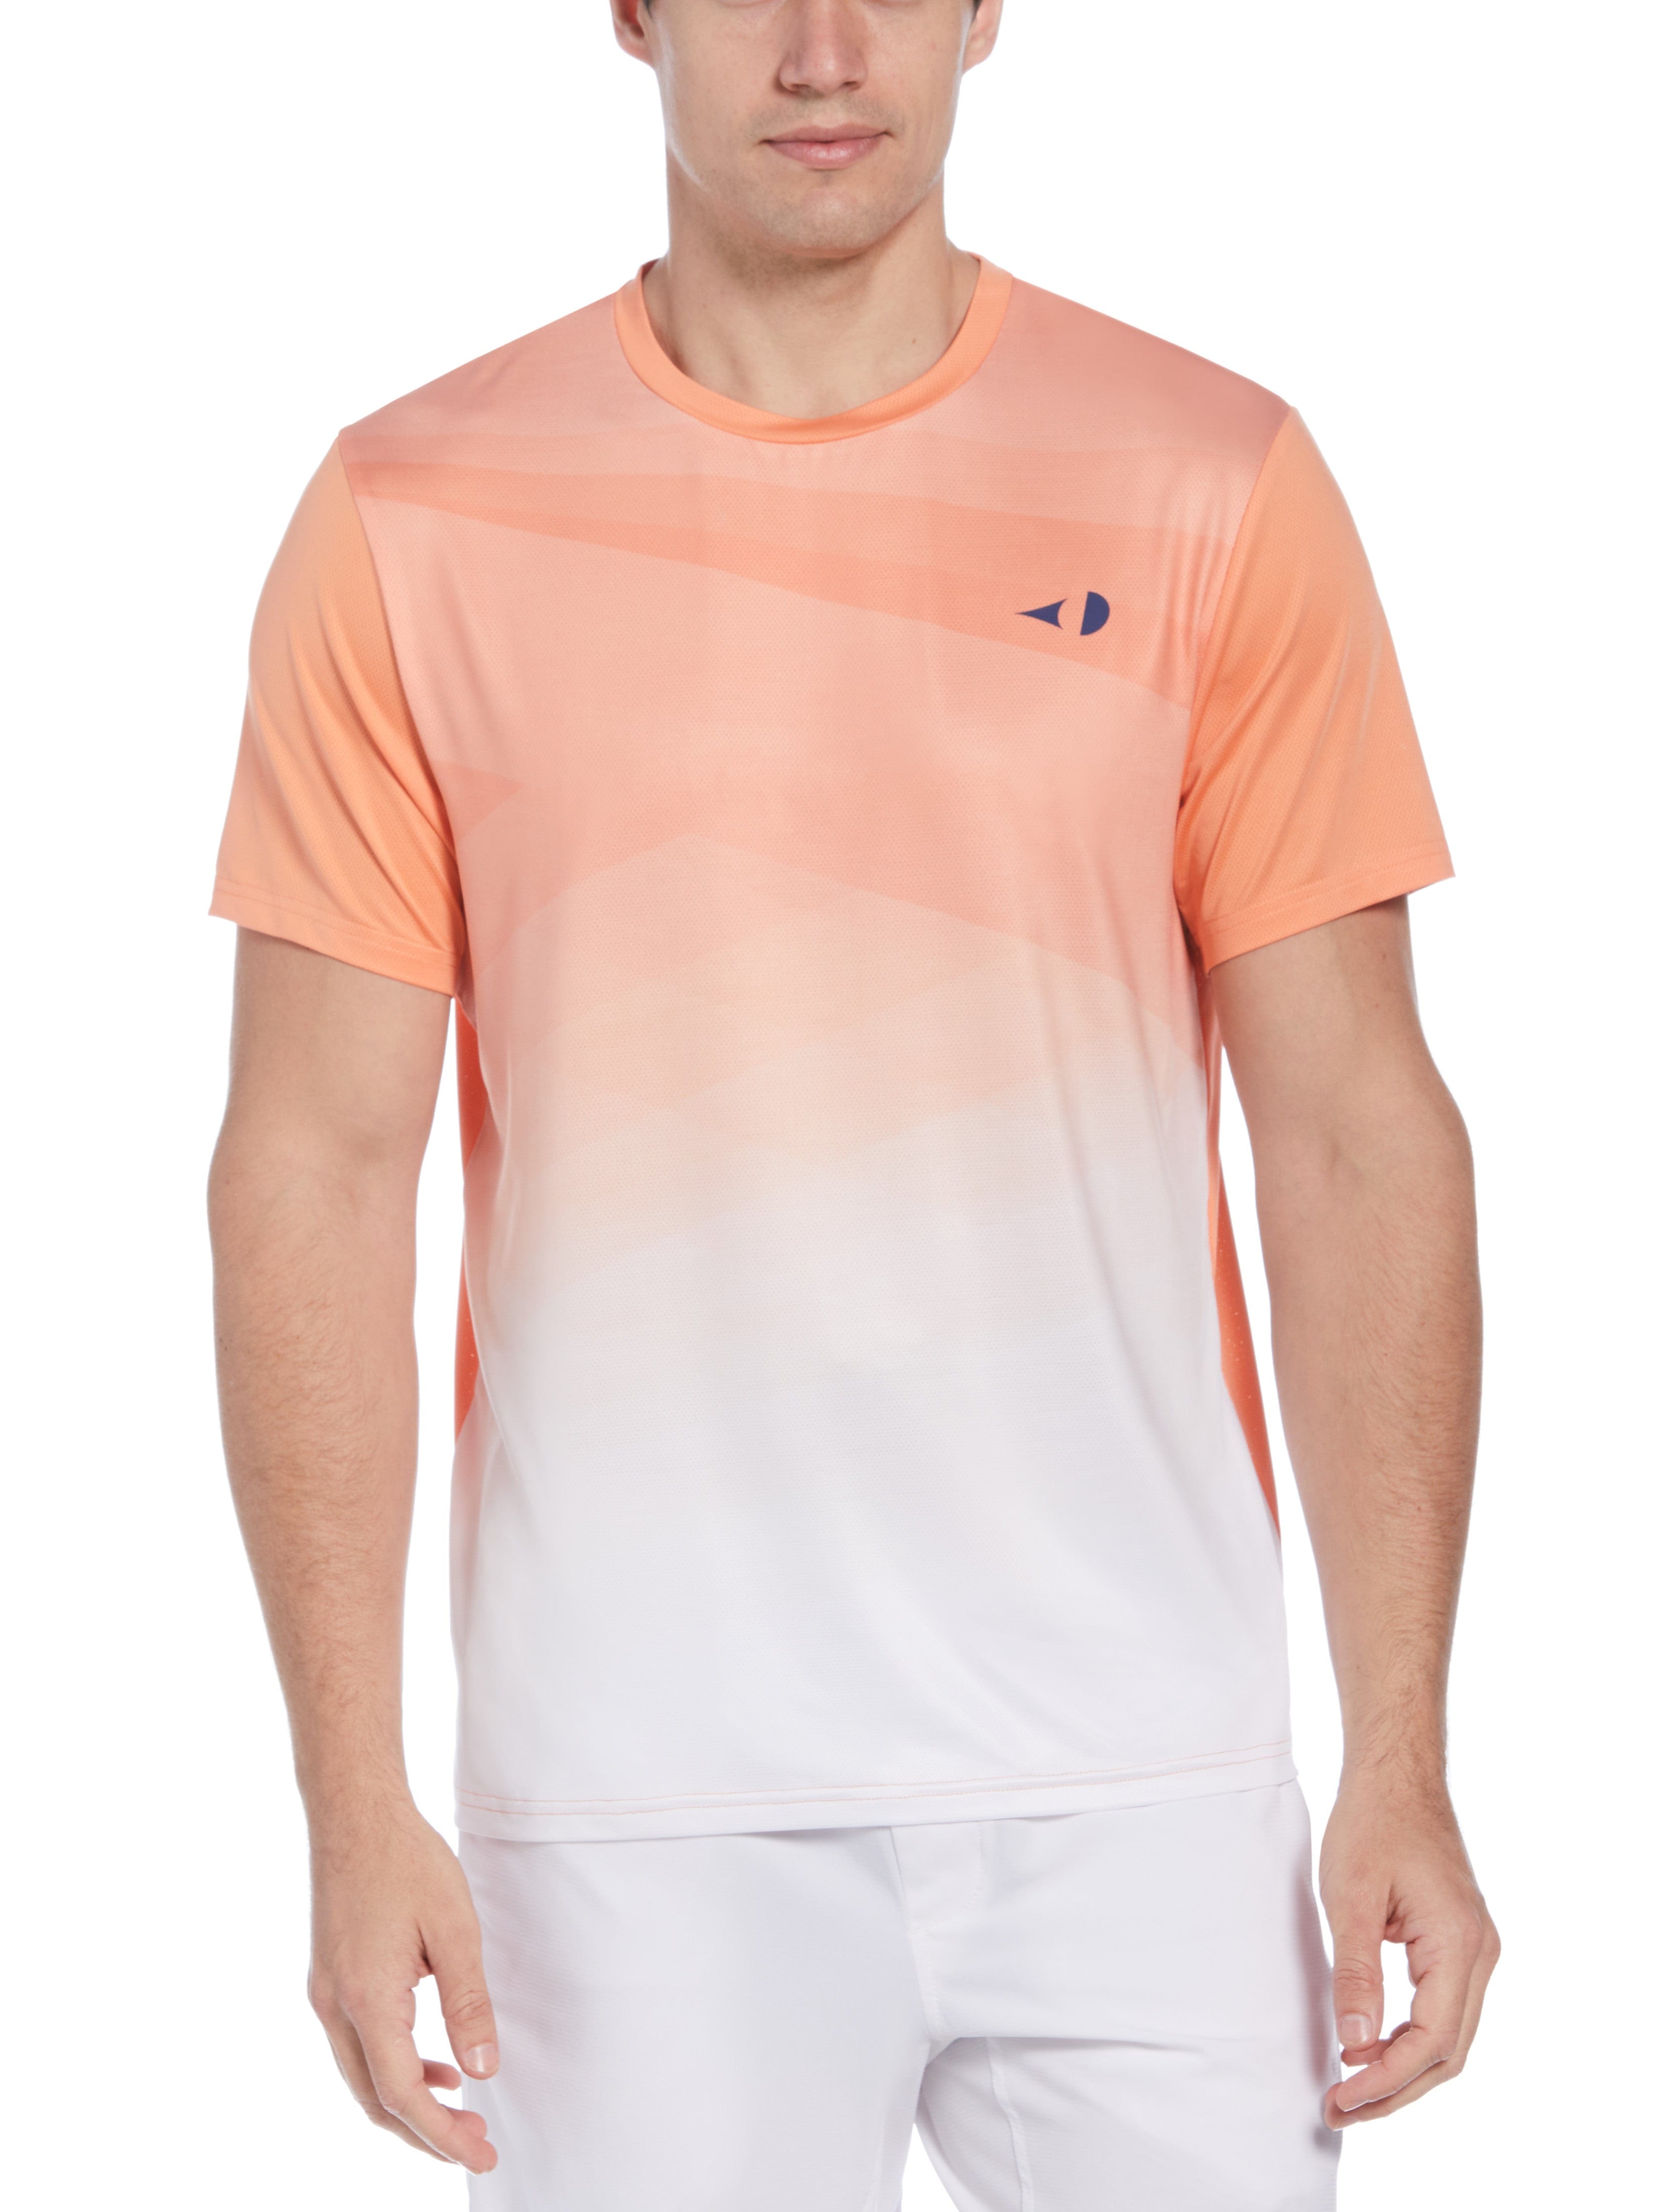 Grand Slam Mens Asymetrical Texture Printed Tennis T-Shirt, Size Large, Candied Yams Orange, Polyester/Spandex | Golf Apparel Shop